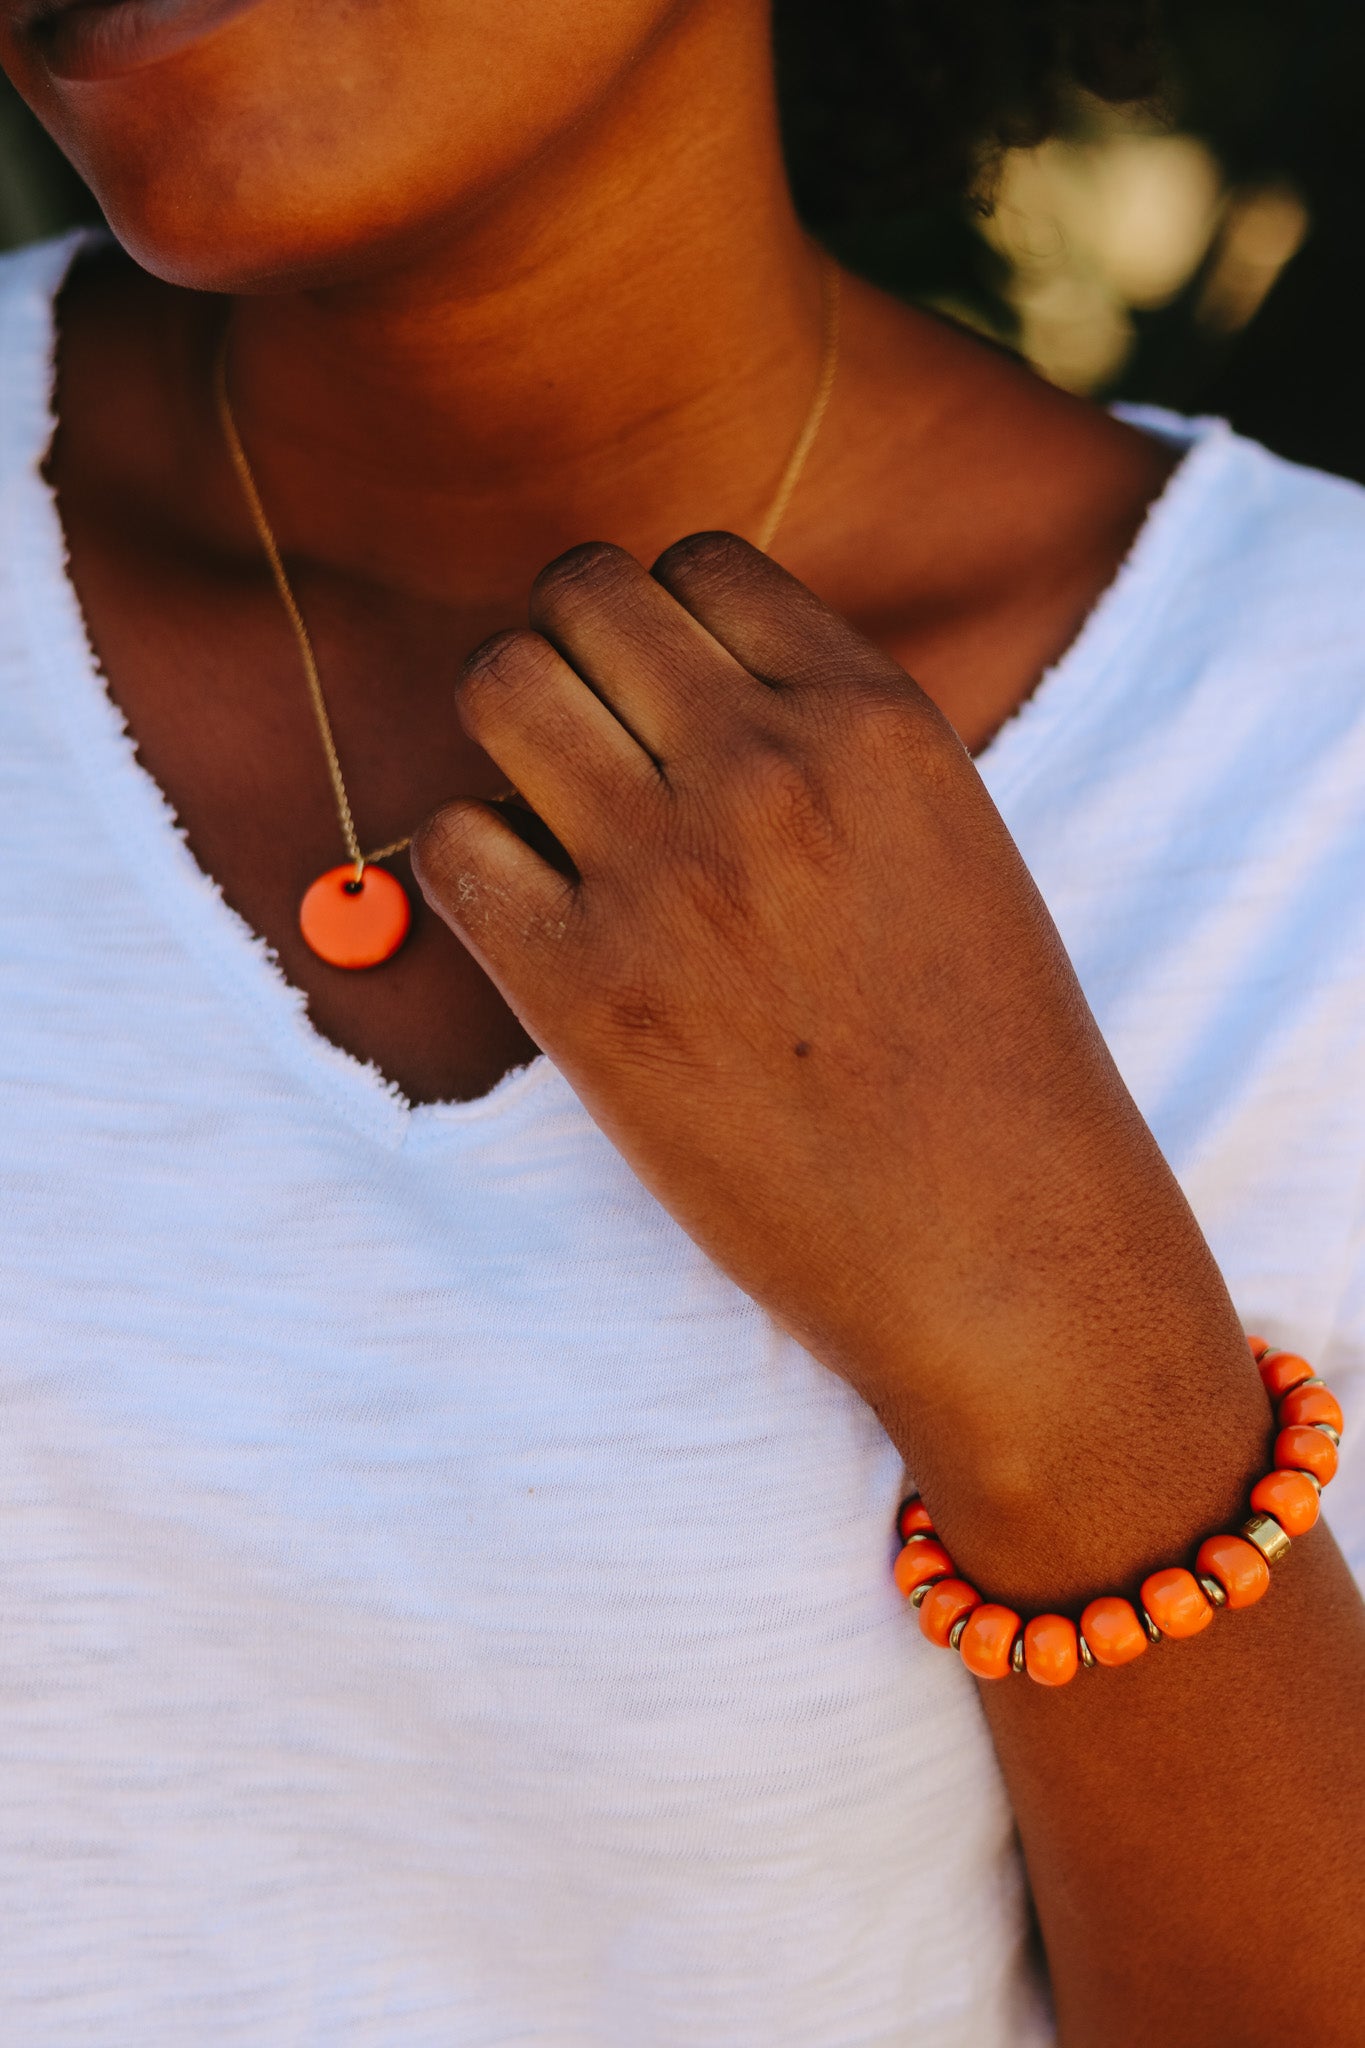 Hope Necklace - Tangerine (Ceramic and Gold)